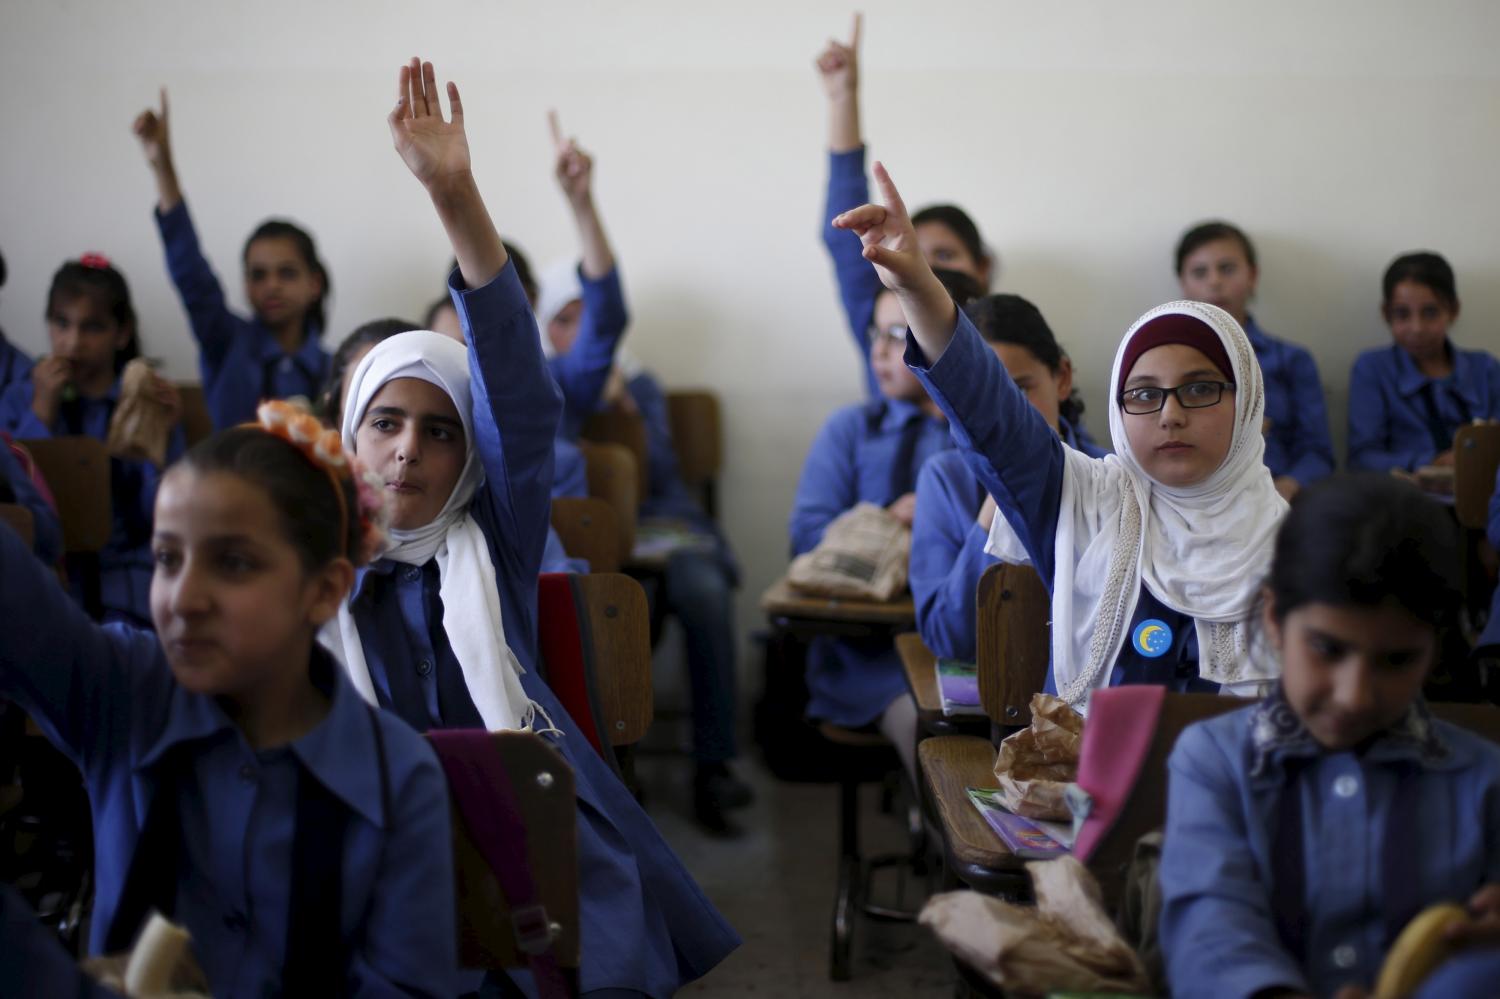 Students raise their hands as they attend class and eat a meal distributed as part of a World Food Programme (WFP)-run project to provide healthy meals to students and to raise awareness of good eating habits, at Hofa Al-Mazar school in the city of Irbid, Jordan, April 26, 2016. REUTERS/ Muhammad Hamed - GF10000396485